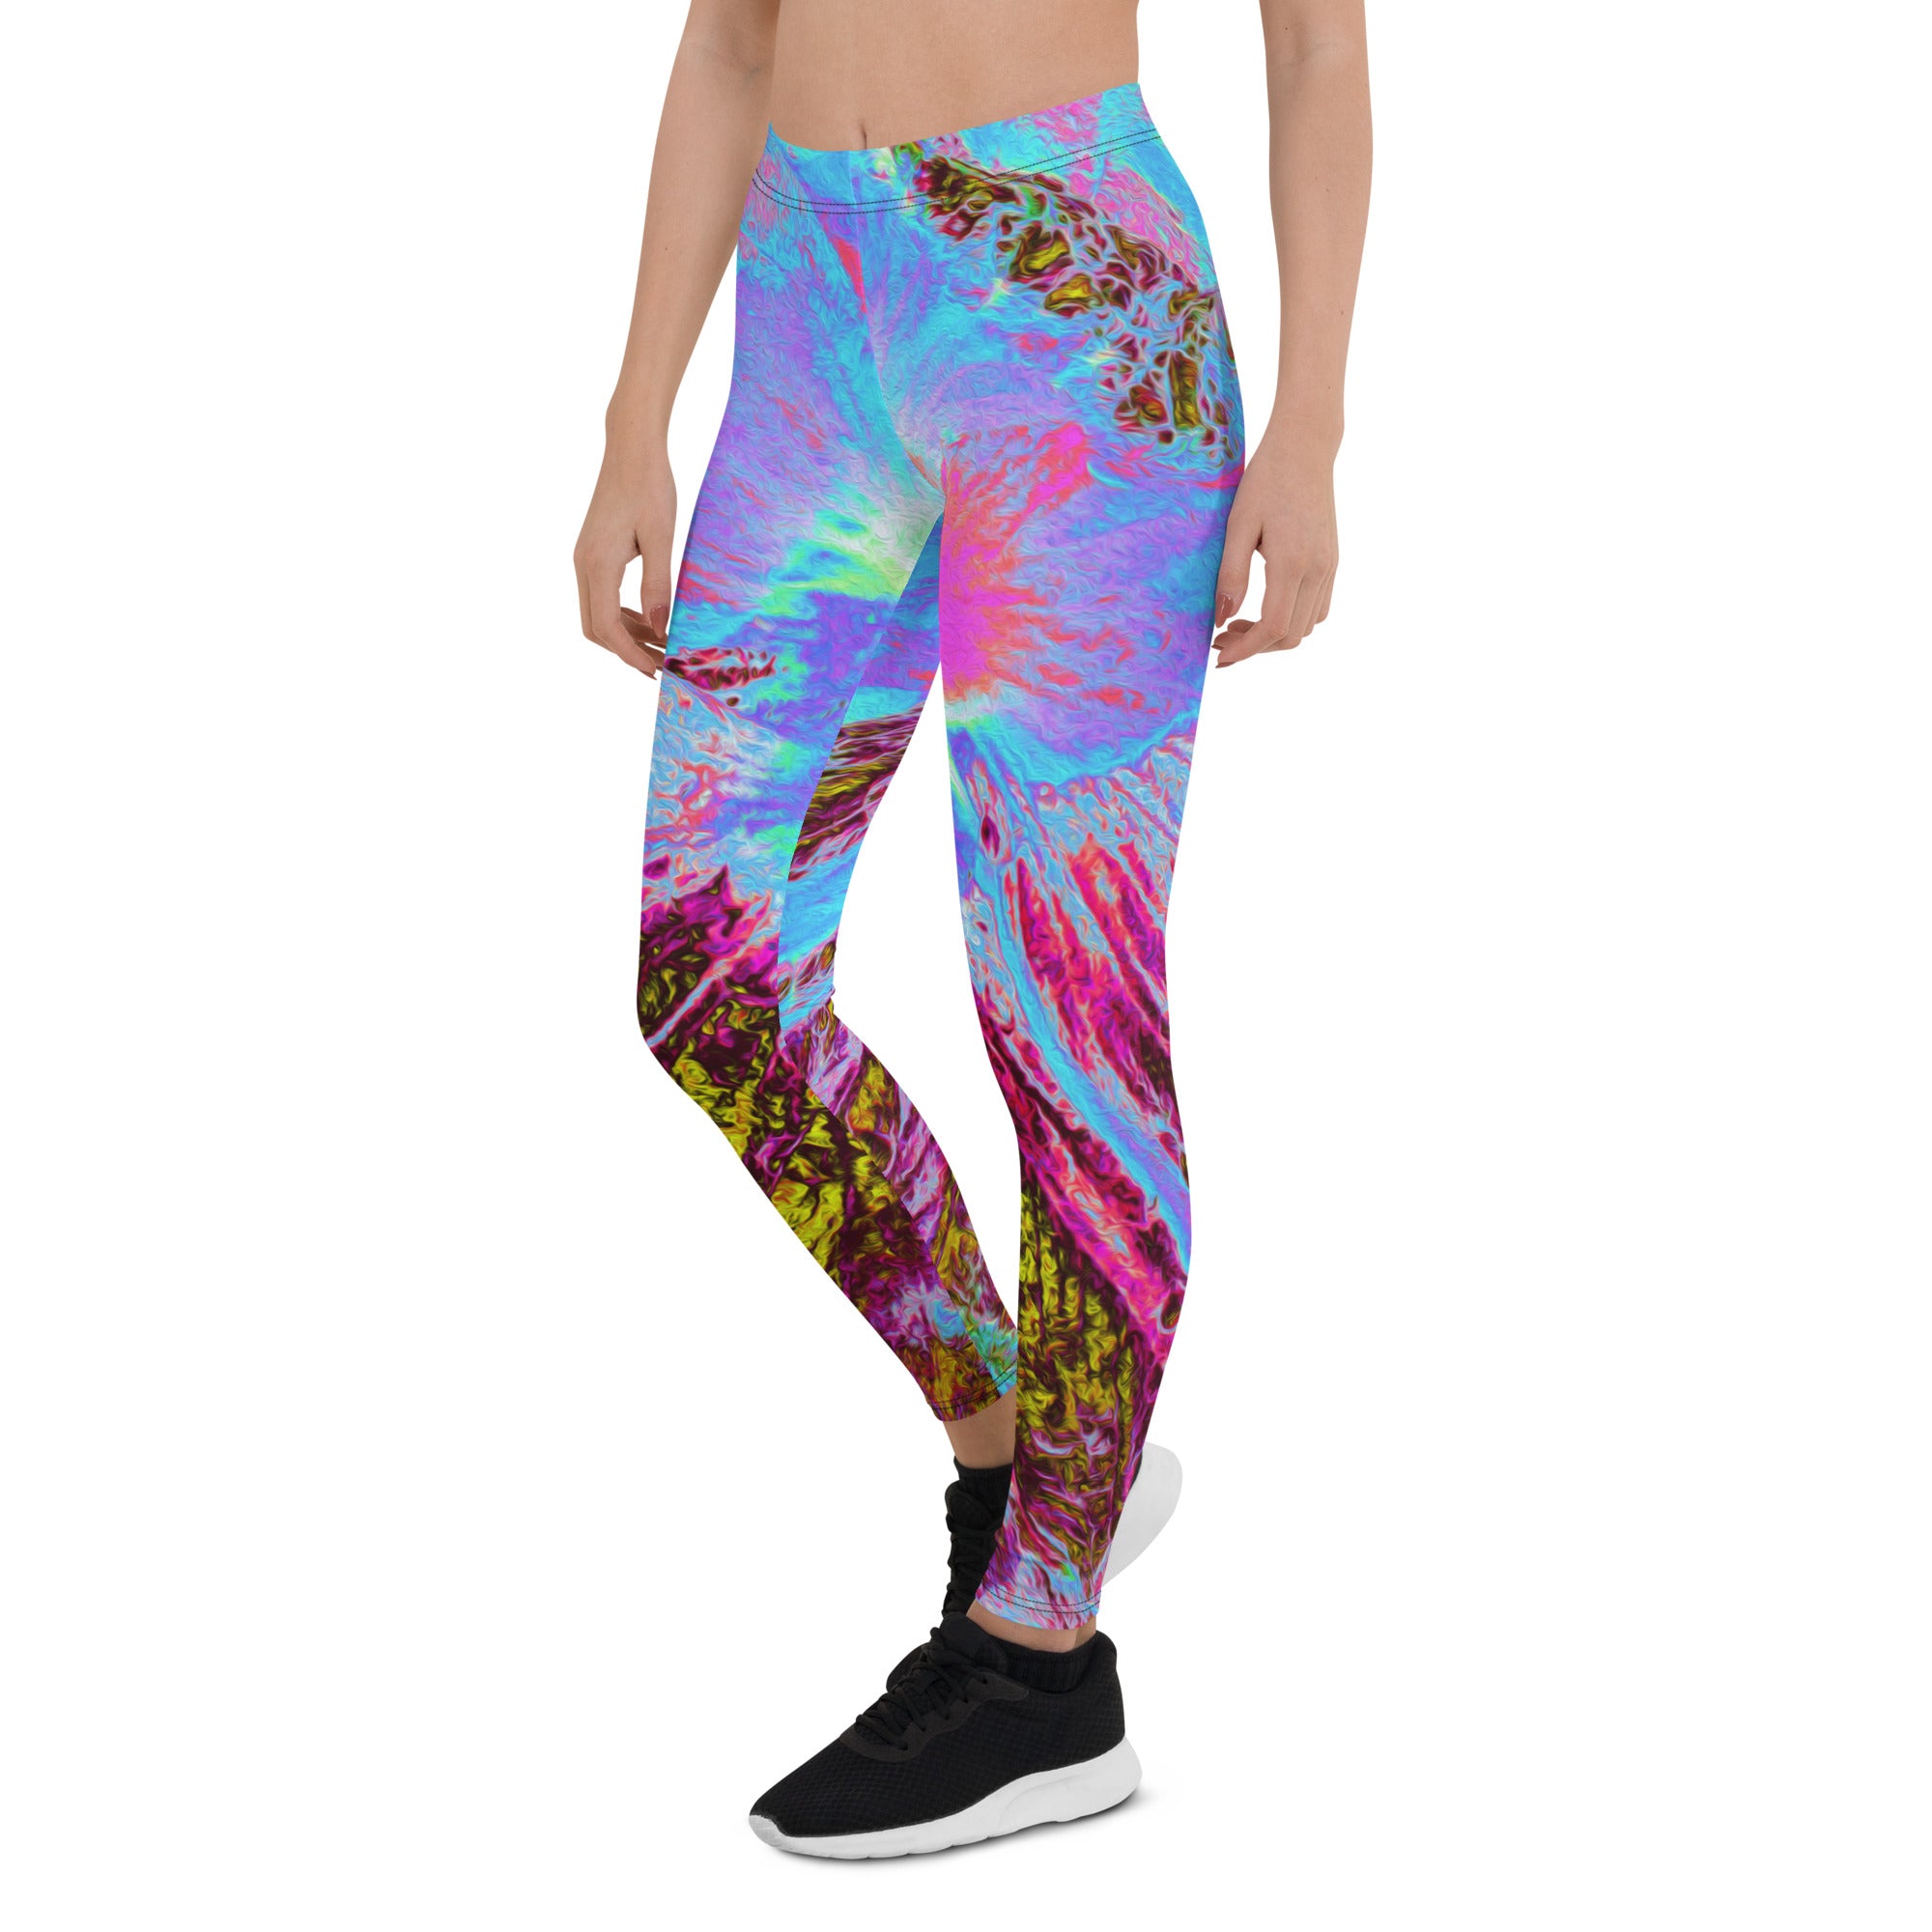 Leggings for Women, Psychedelic Cornflower Blue and Magenta Hibiscus